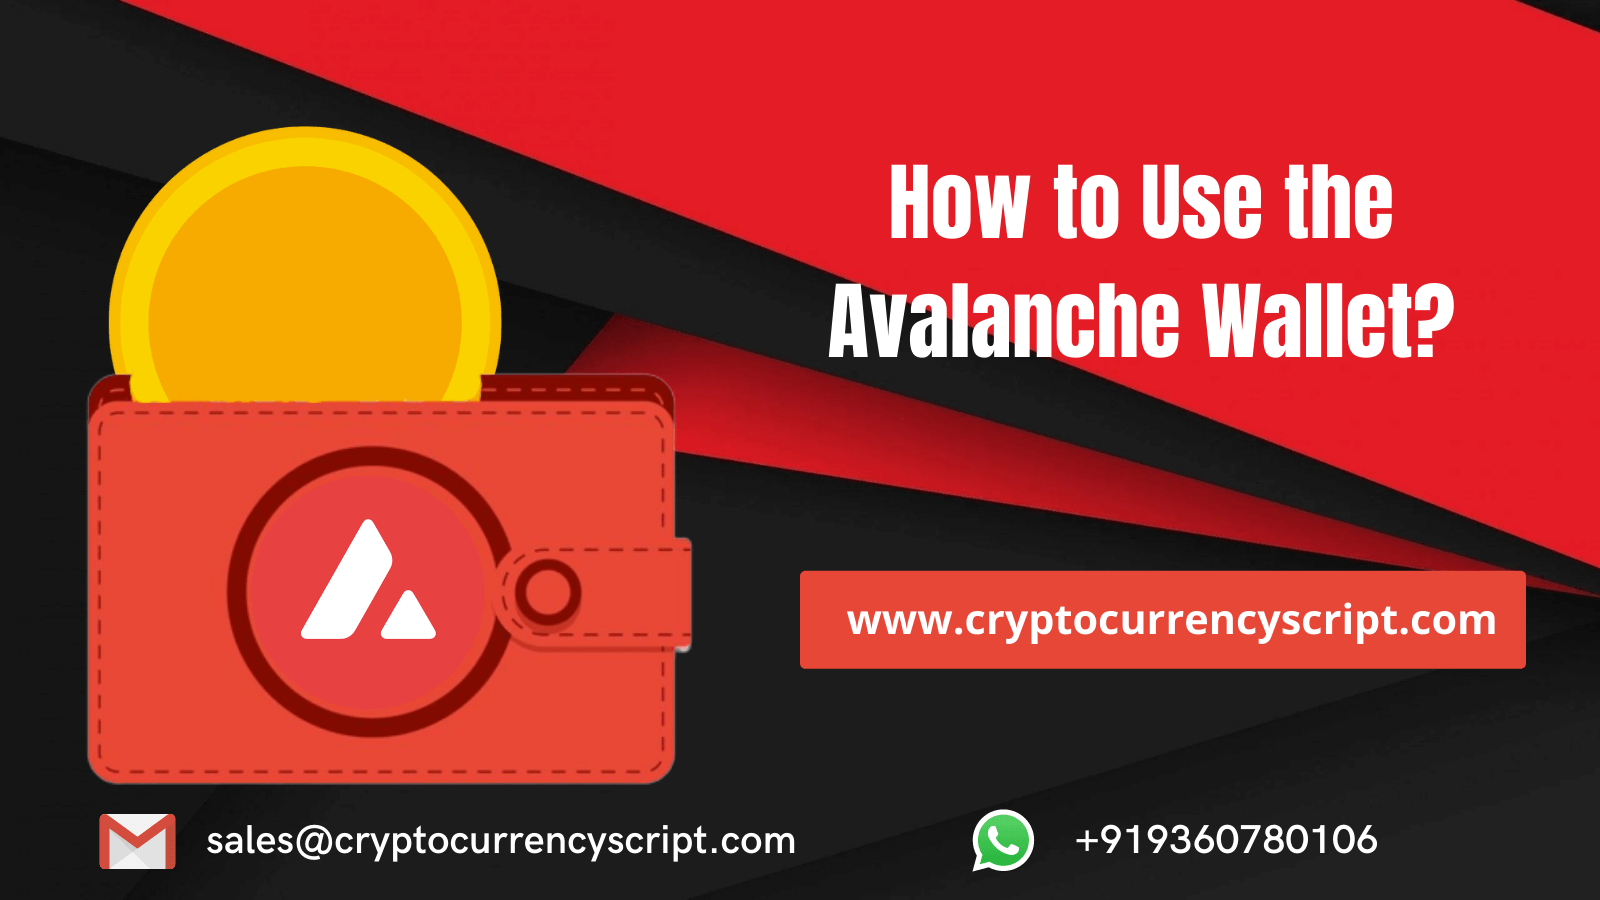 How to Use the Avalanche Wallet?